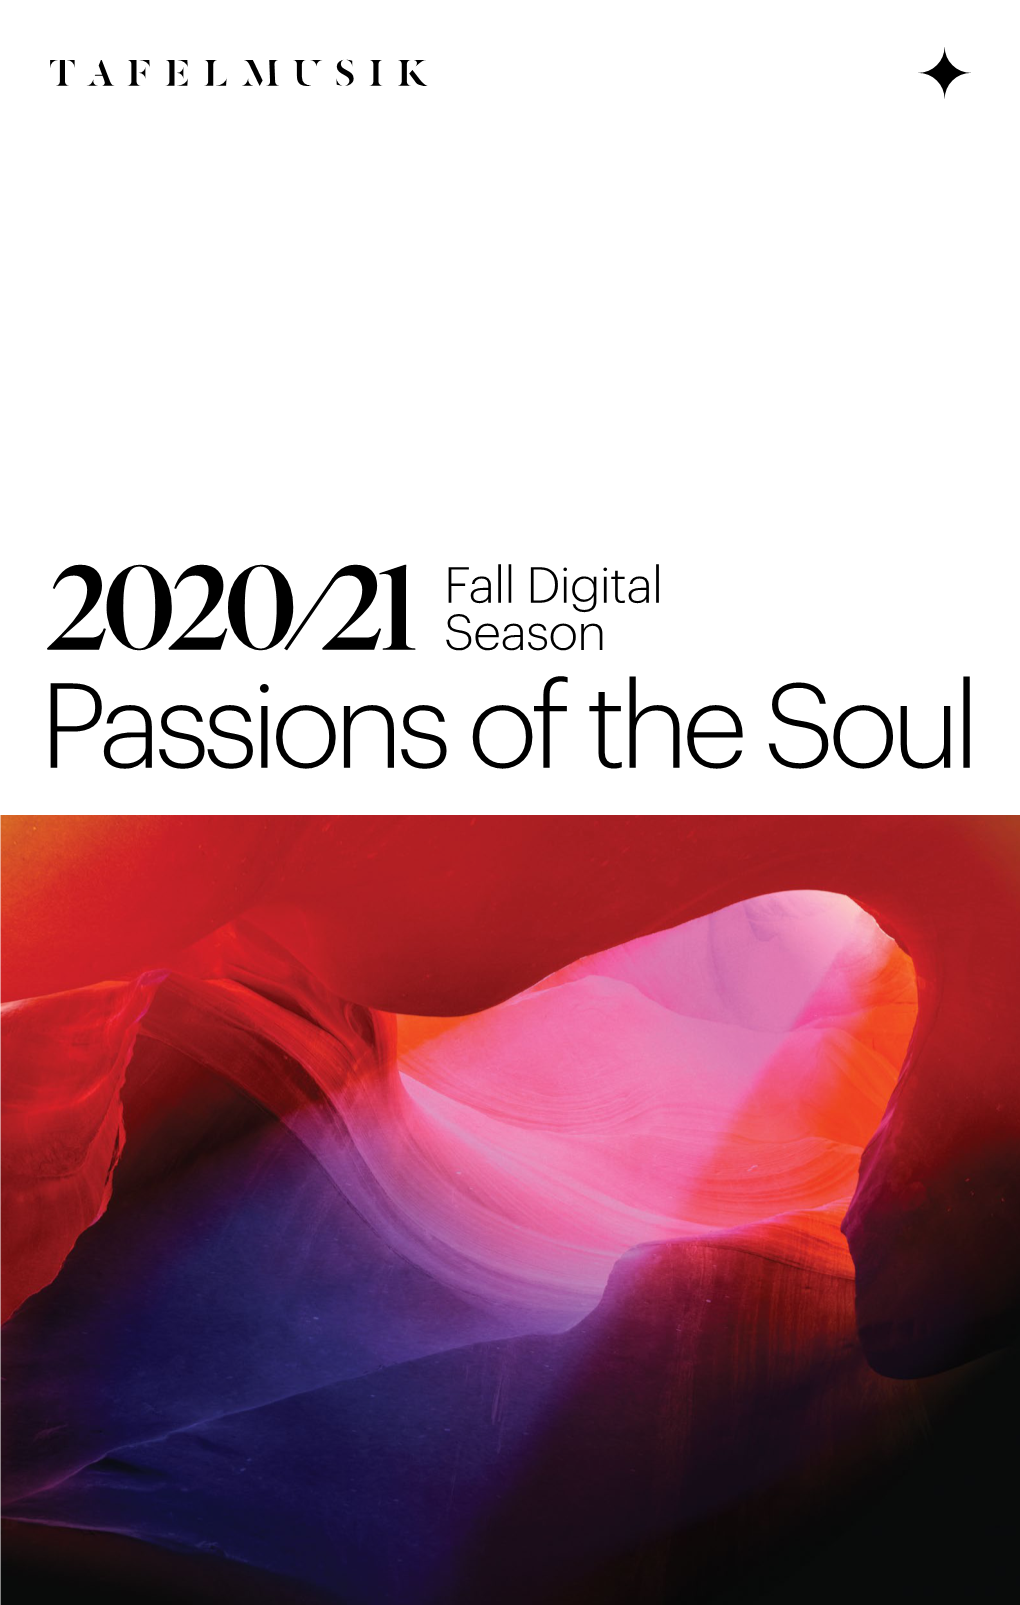 Passions of the Soul Welcome